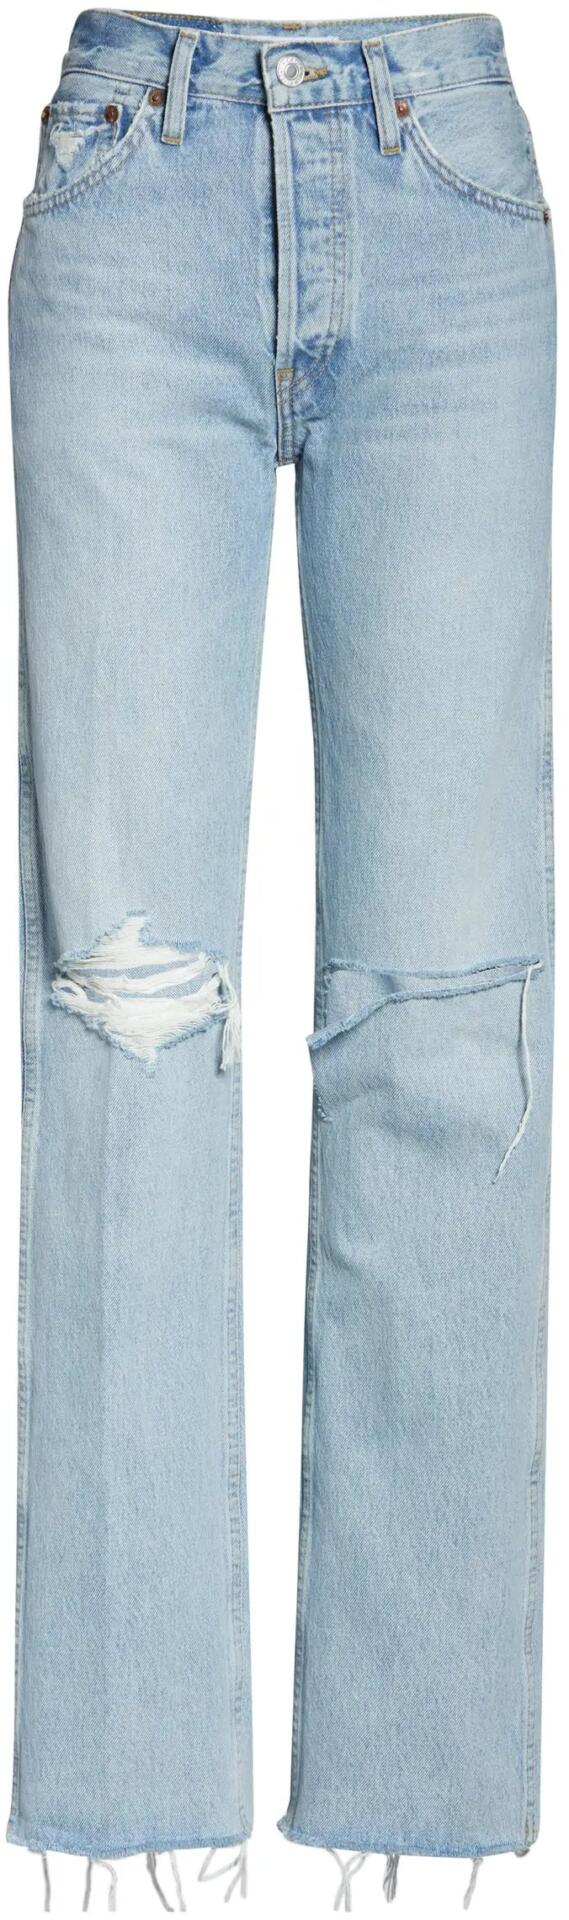 90s Jeans (Breezy Indigo With Rips) | style